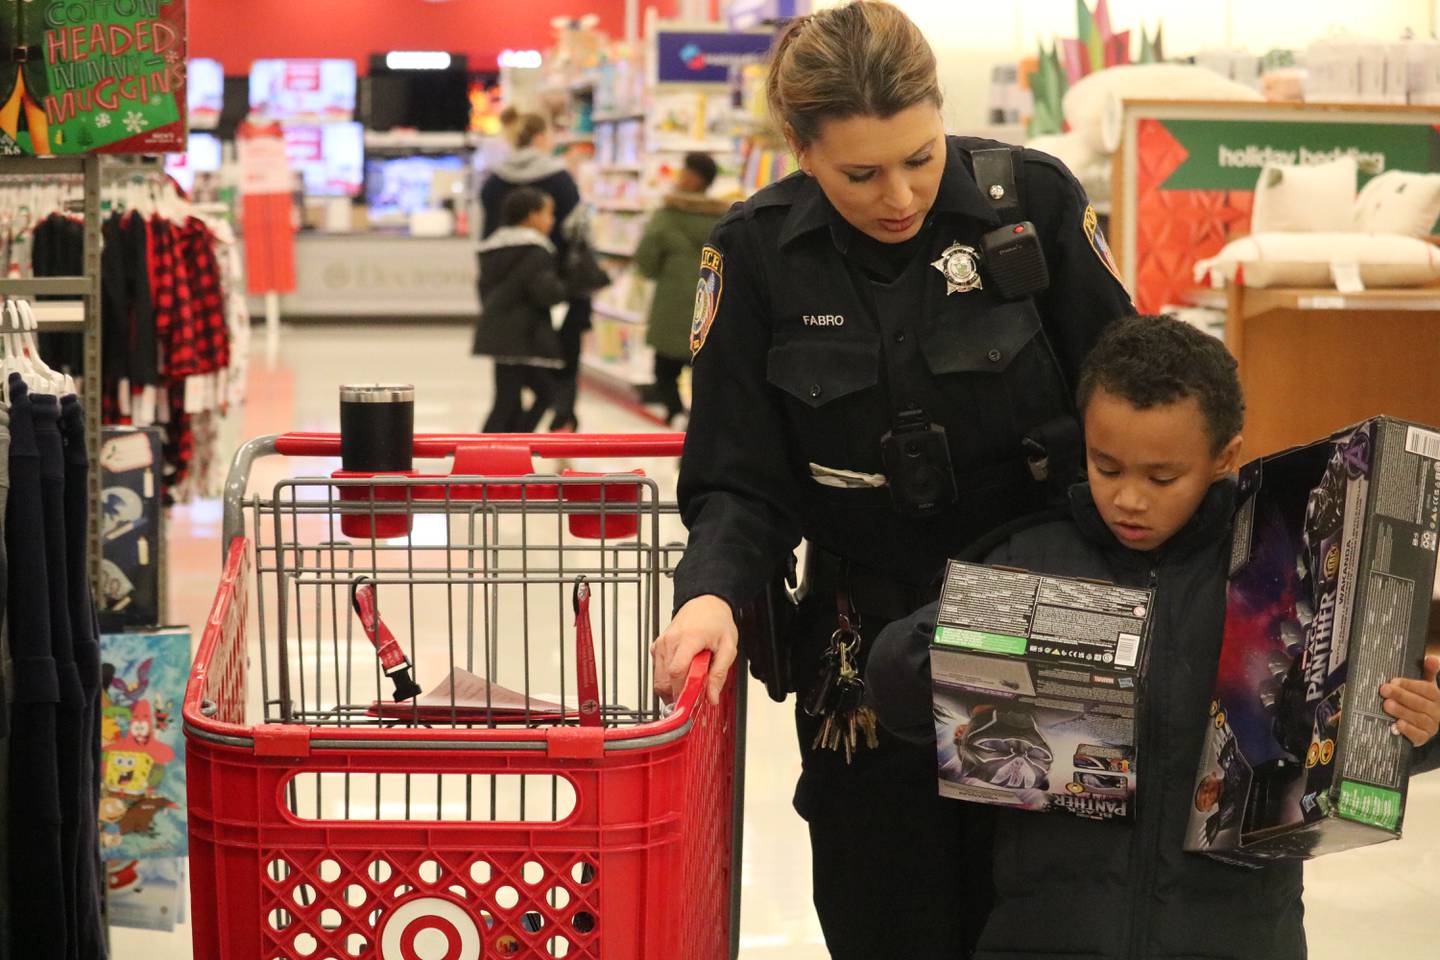 Officer Fabro (left) shops with Pierre Carter, 7, (right) of DeKalb as part of the "Heroes and Helpers" program put on by DeKalb police Sunday, Dec. 4, 2022.